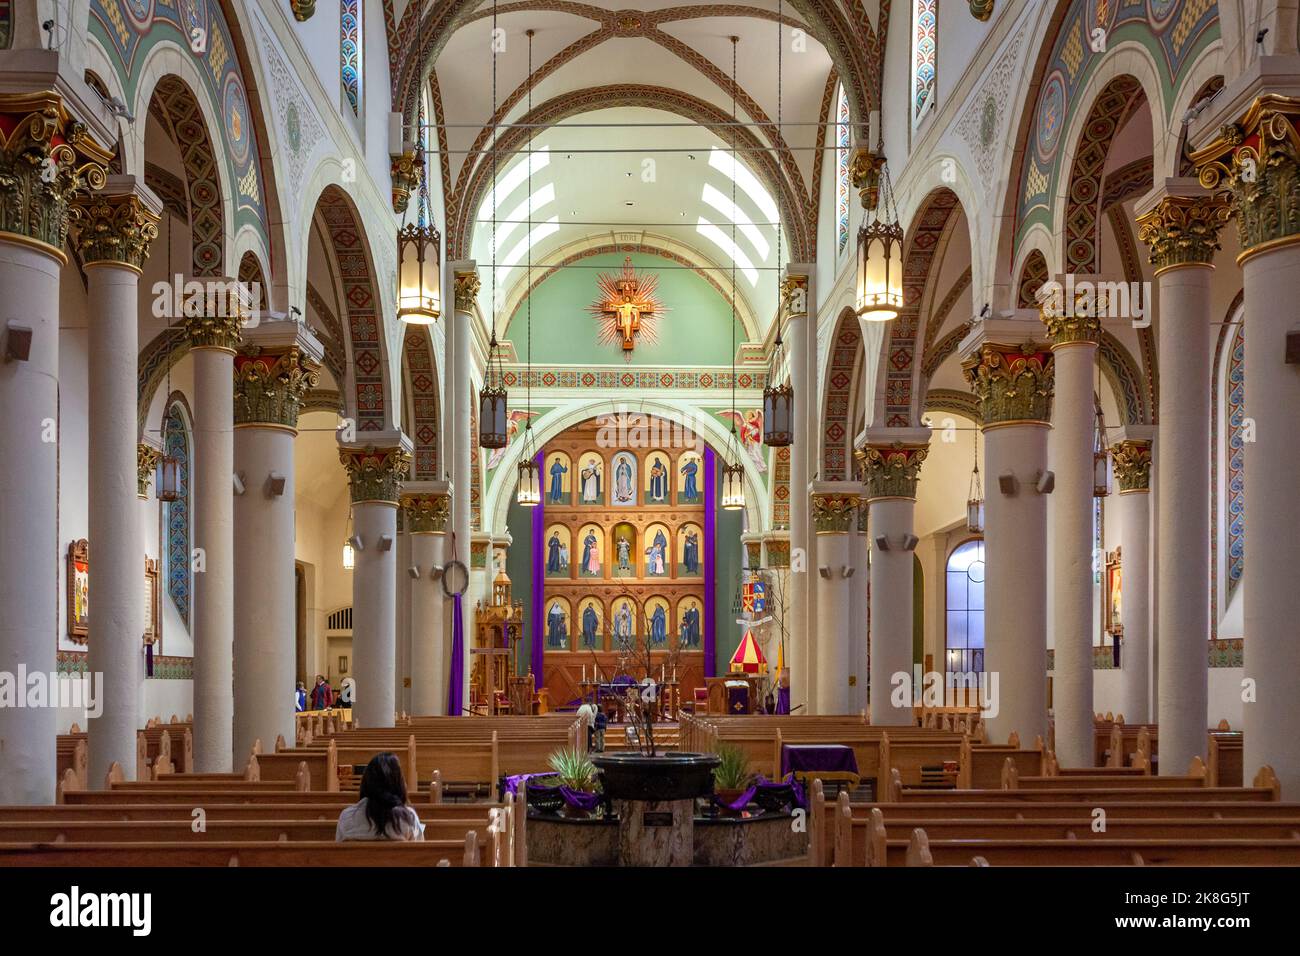 The nave and sanctuary of 19th century Cathedral Basilica of Saint Francis of Assisi - Catedral basílica de San Francisco de Asís in Santa Fe, NM Stock Photo